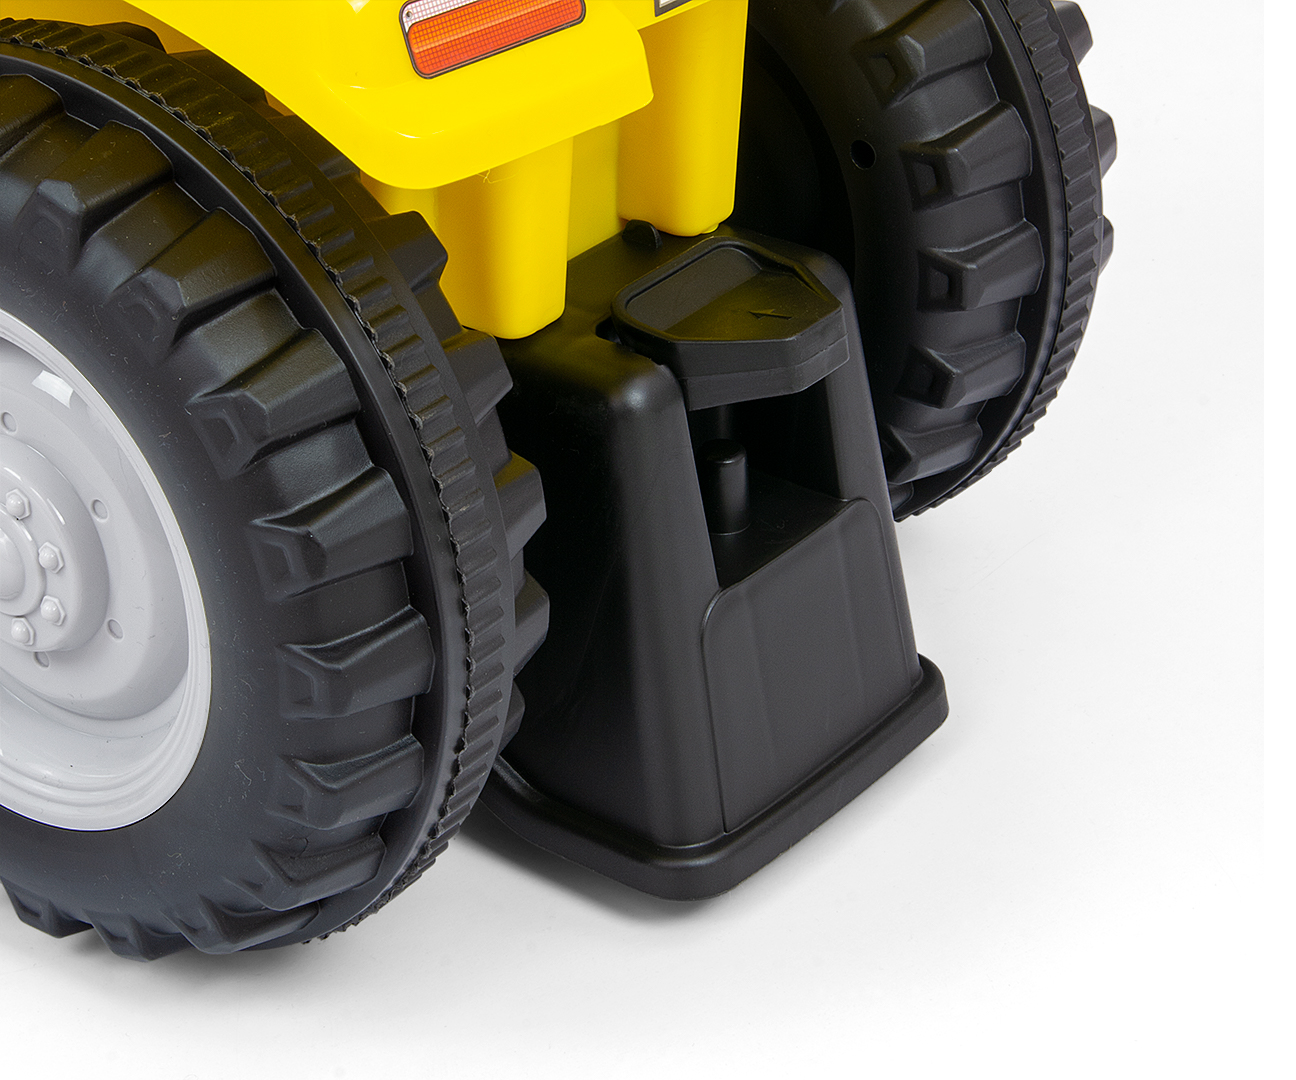 Milly Mally Ride On New Holland T7 Tractor Yellow